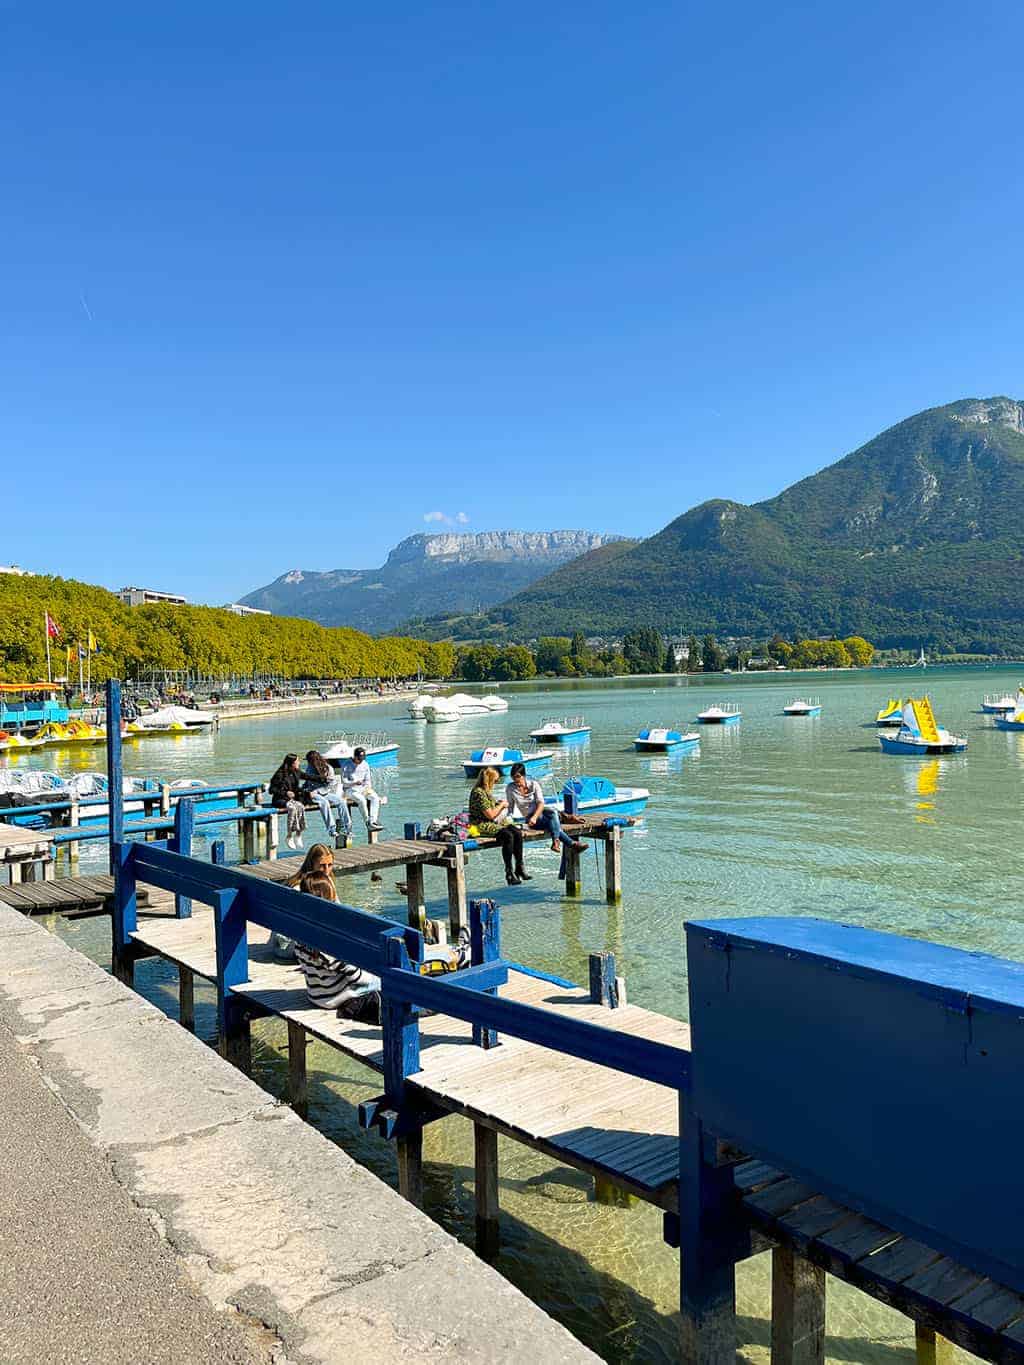 Day trip to Annecy France - Cobblestone streets, colorful architecture, and a stunning crystal blue lake - Lake Annecy